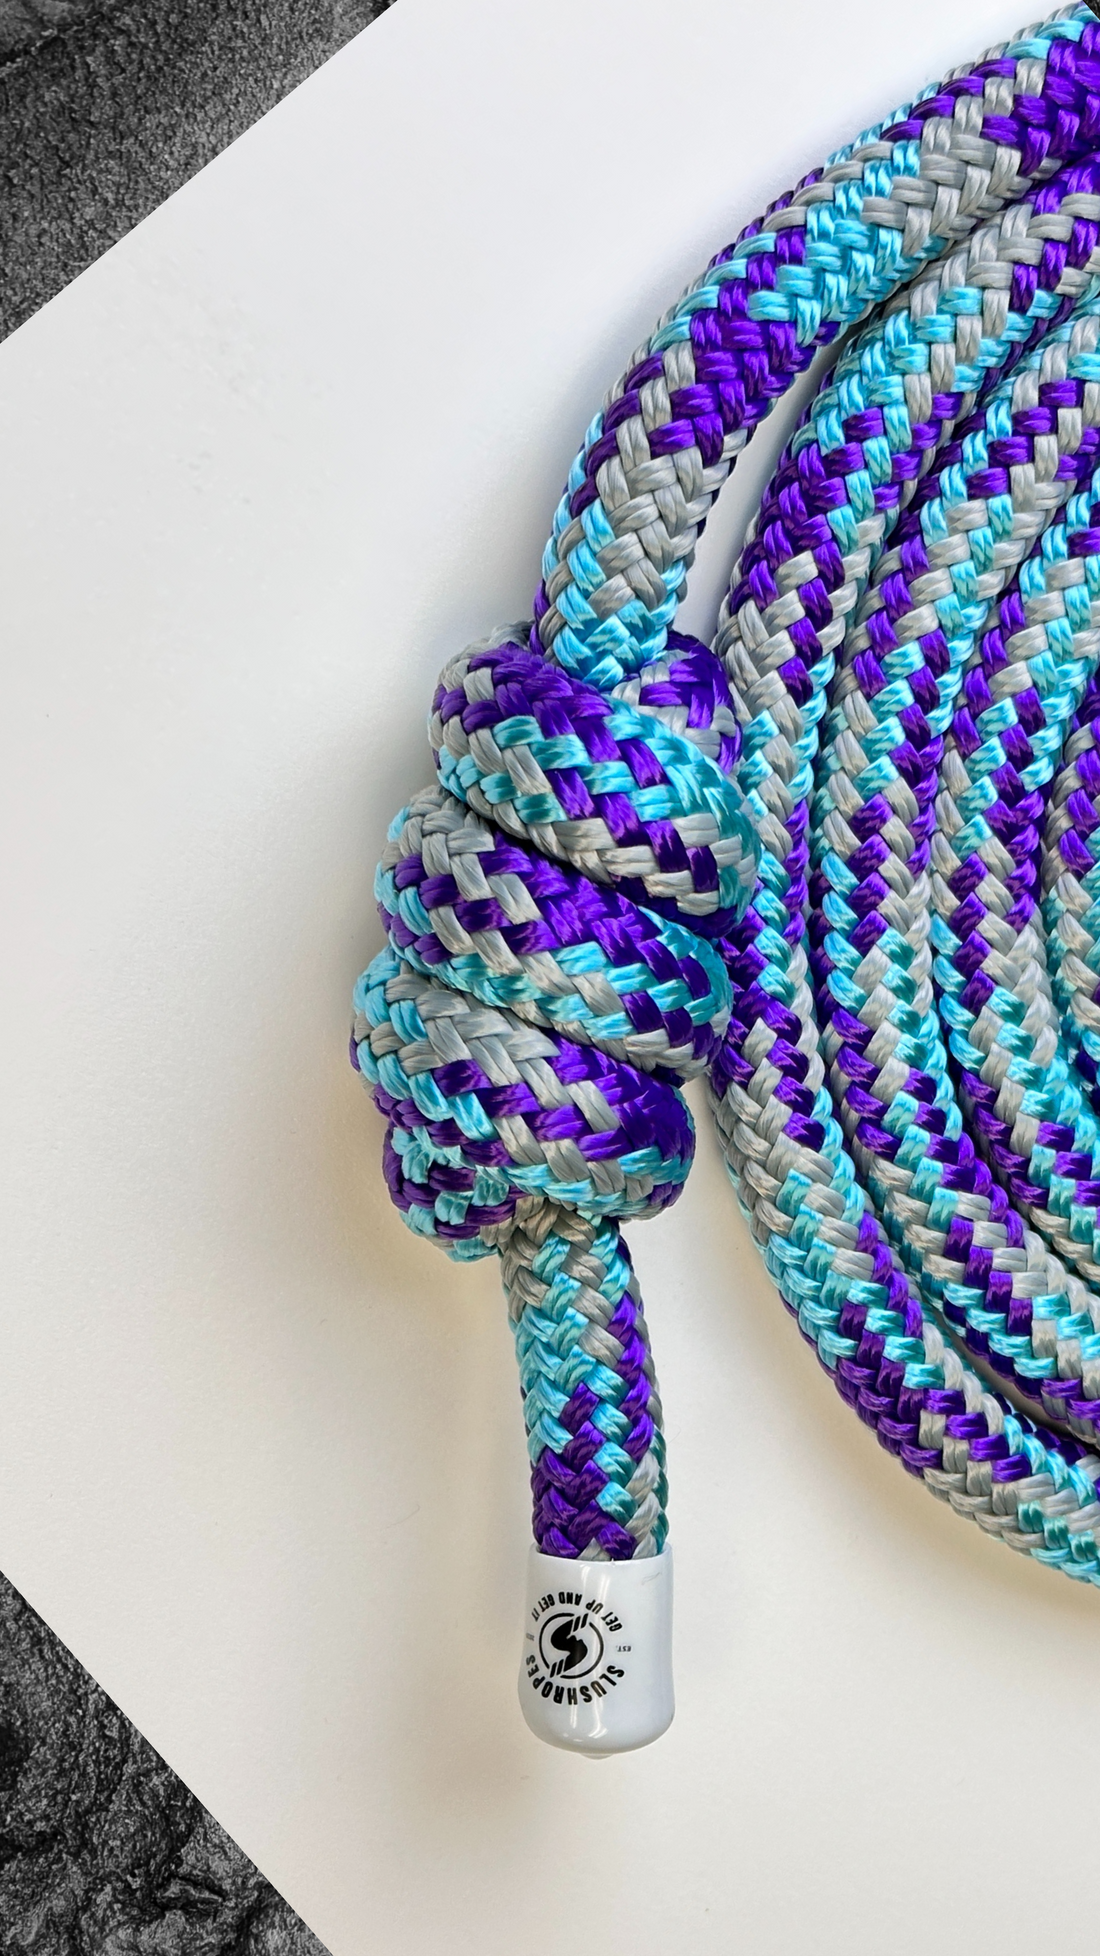 LIMITED EDITION FLOW ROPES YOU DON’T WANT TO MISS OUT ON